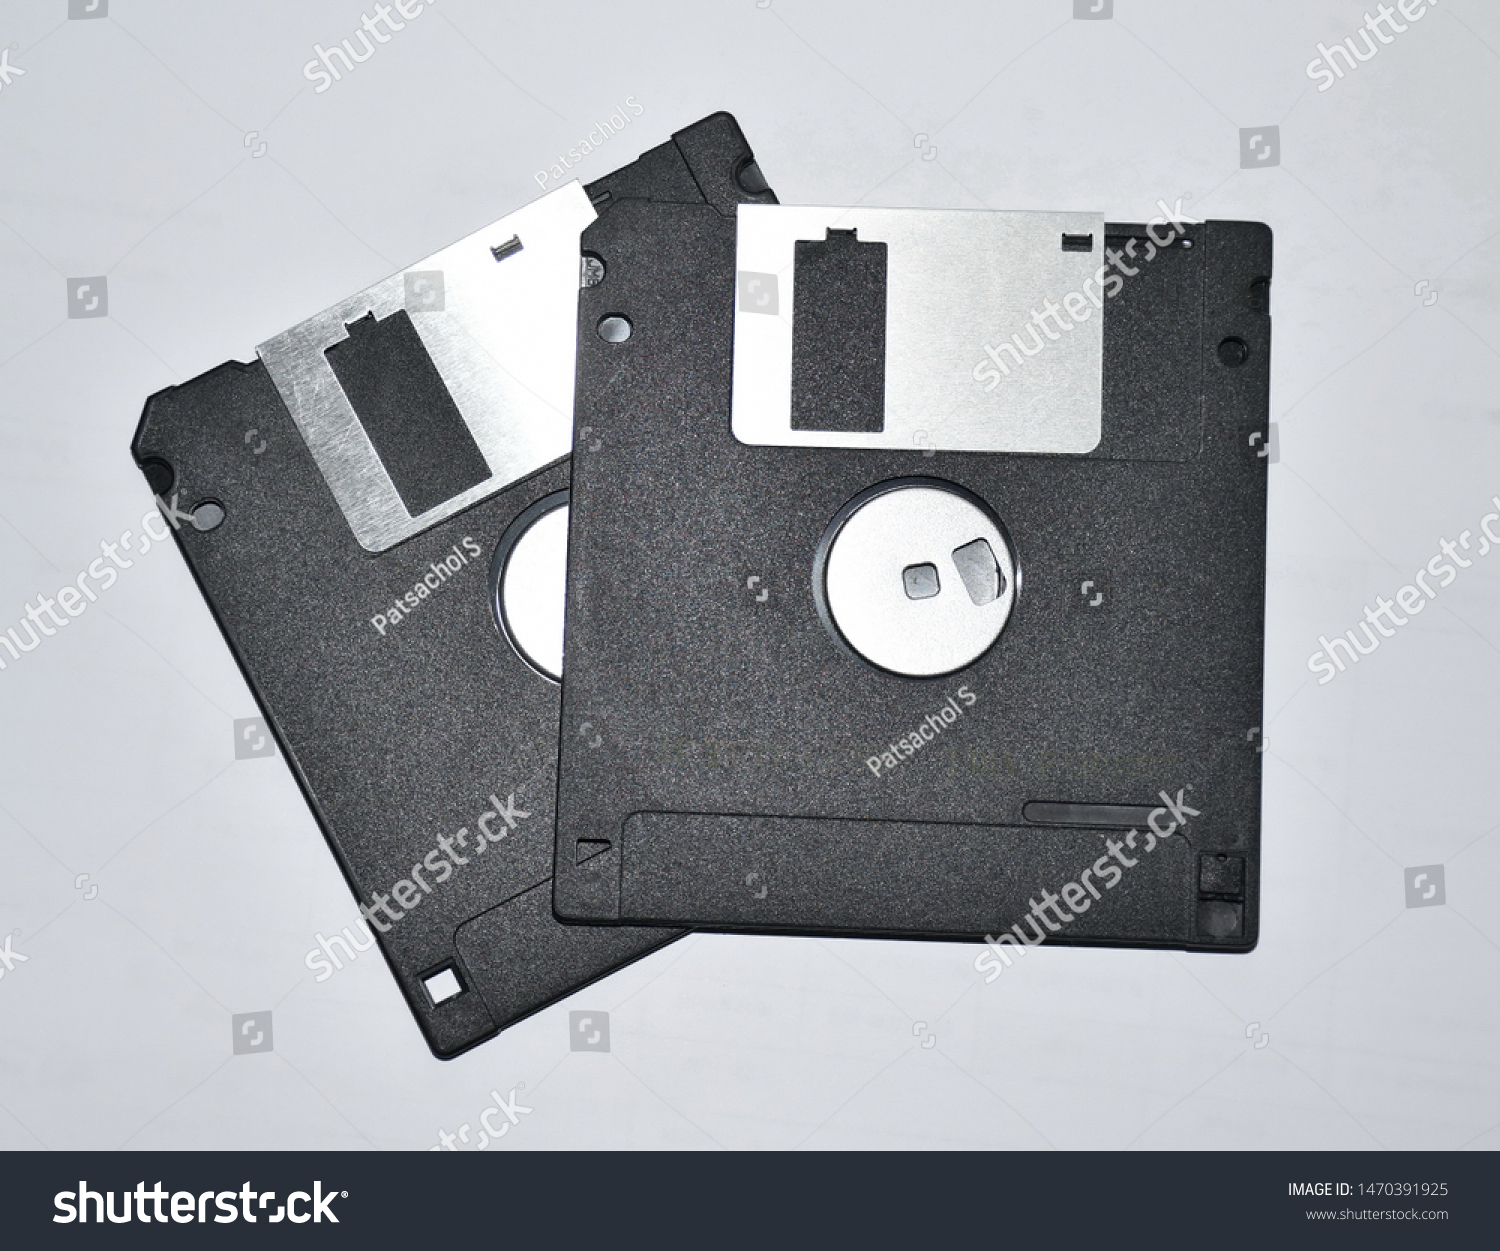 Old black square floppy disks, isolated on a white background. #1470391925